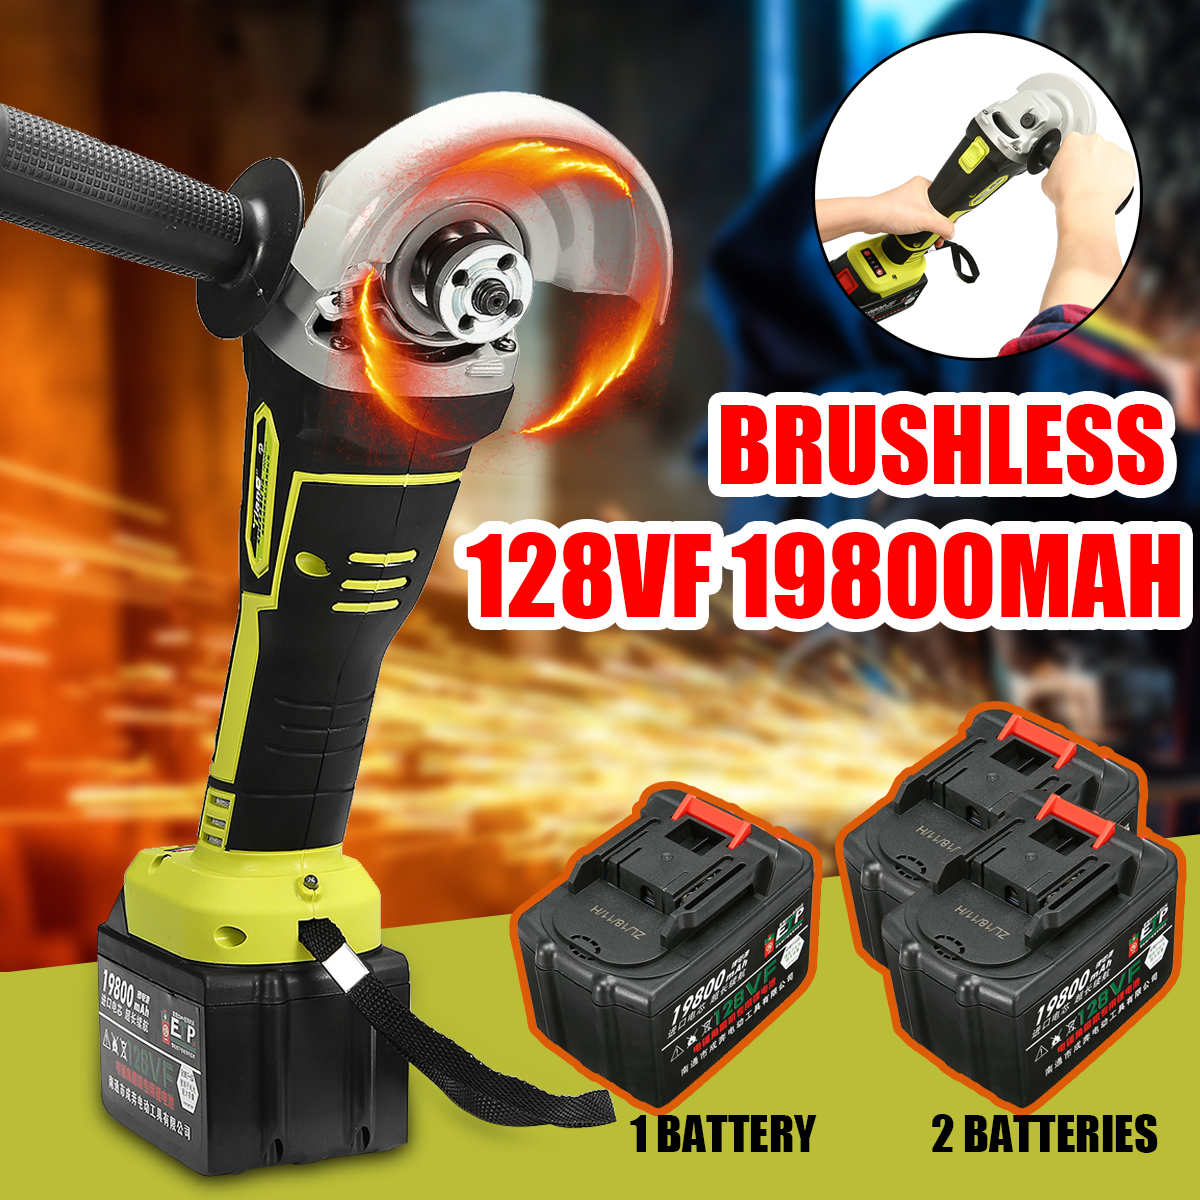 128VF-19800mAh-Lithium-Ion-Brushless-Cut-Off-Angle-Grinder-Cordless-Electric-Angle-Grinder-Power-Cut-1397283-3